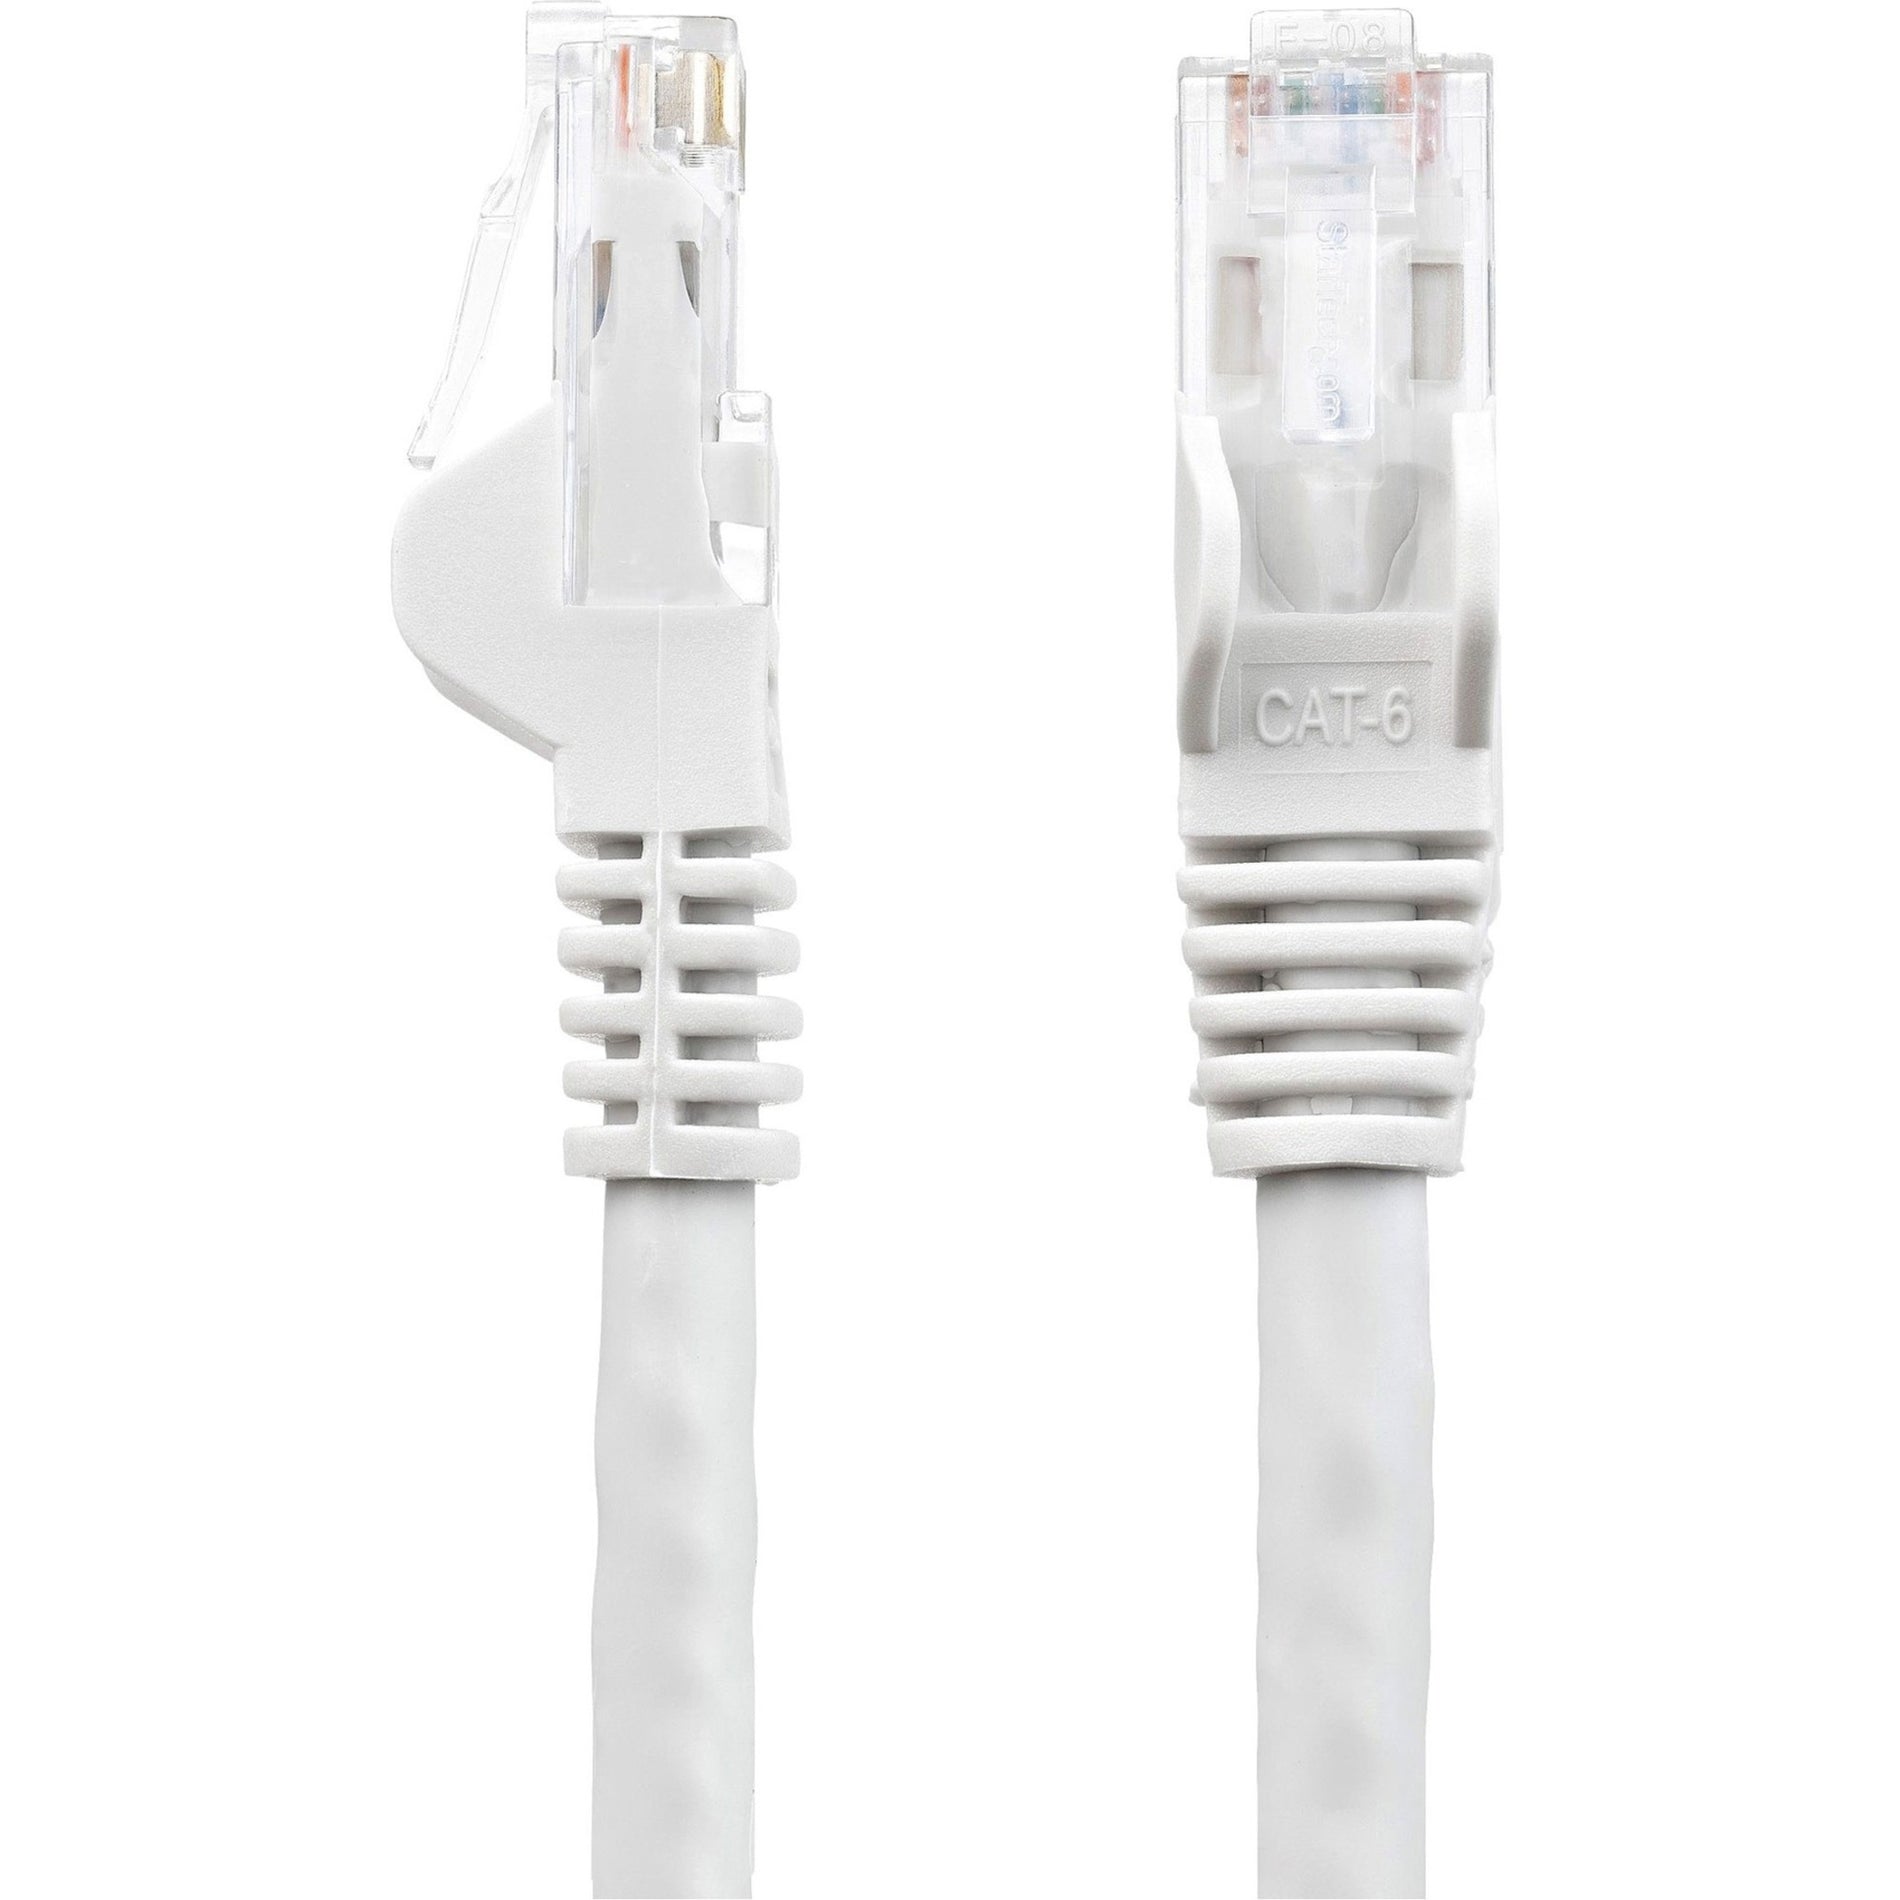 StarTech.com N6PATCH50WH 50 ft White Snagless Cat6 UTP Patch Cable - ETL Verified, Lifetime Warranty, 10 Gbit/s Data Transfer Rate